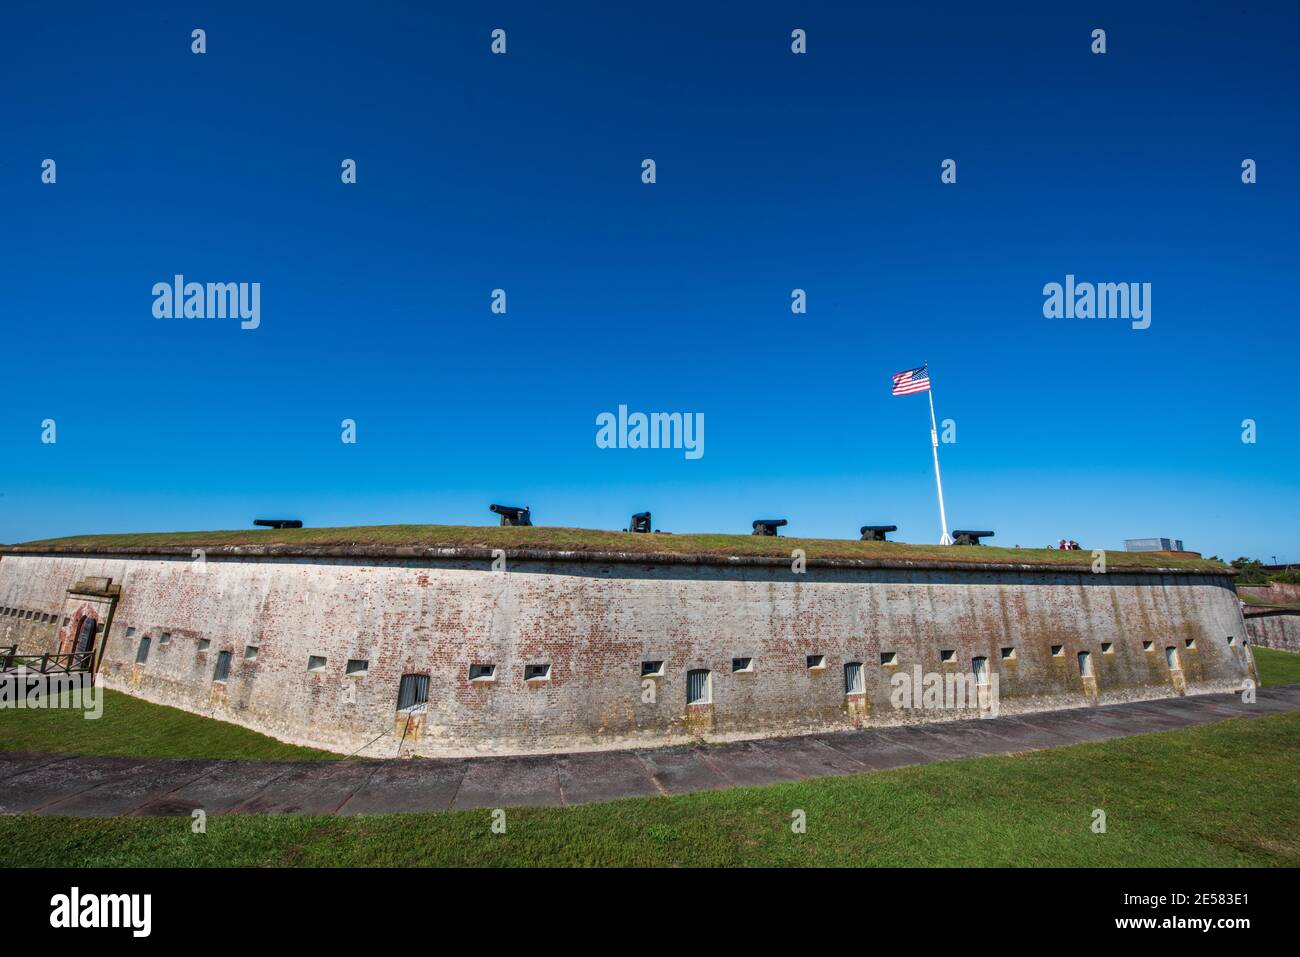 Surrounding Fort Macon's citadel is the sunken area known as the ditch, which was formerly deeper and could be turned into a moat by flooding it with Stock Photo